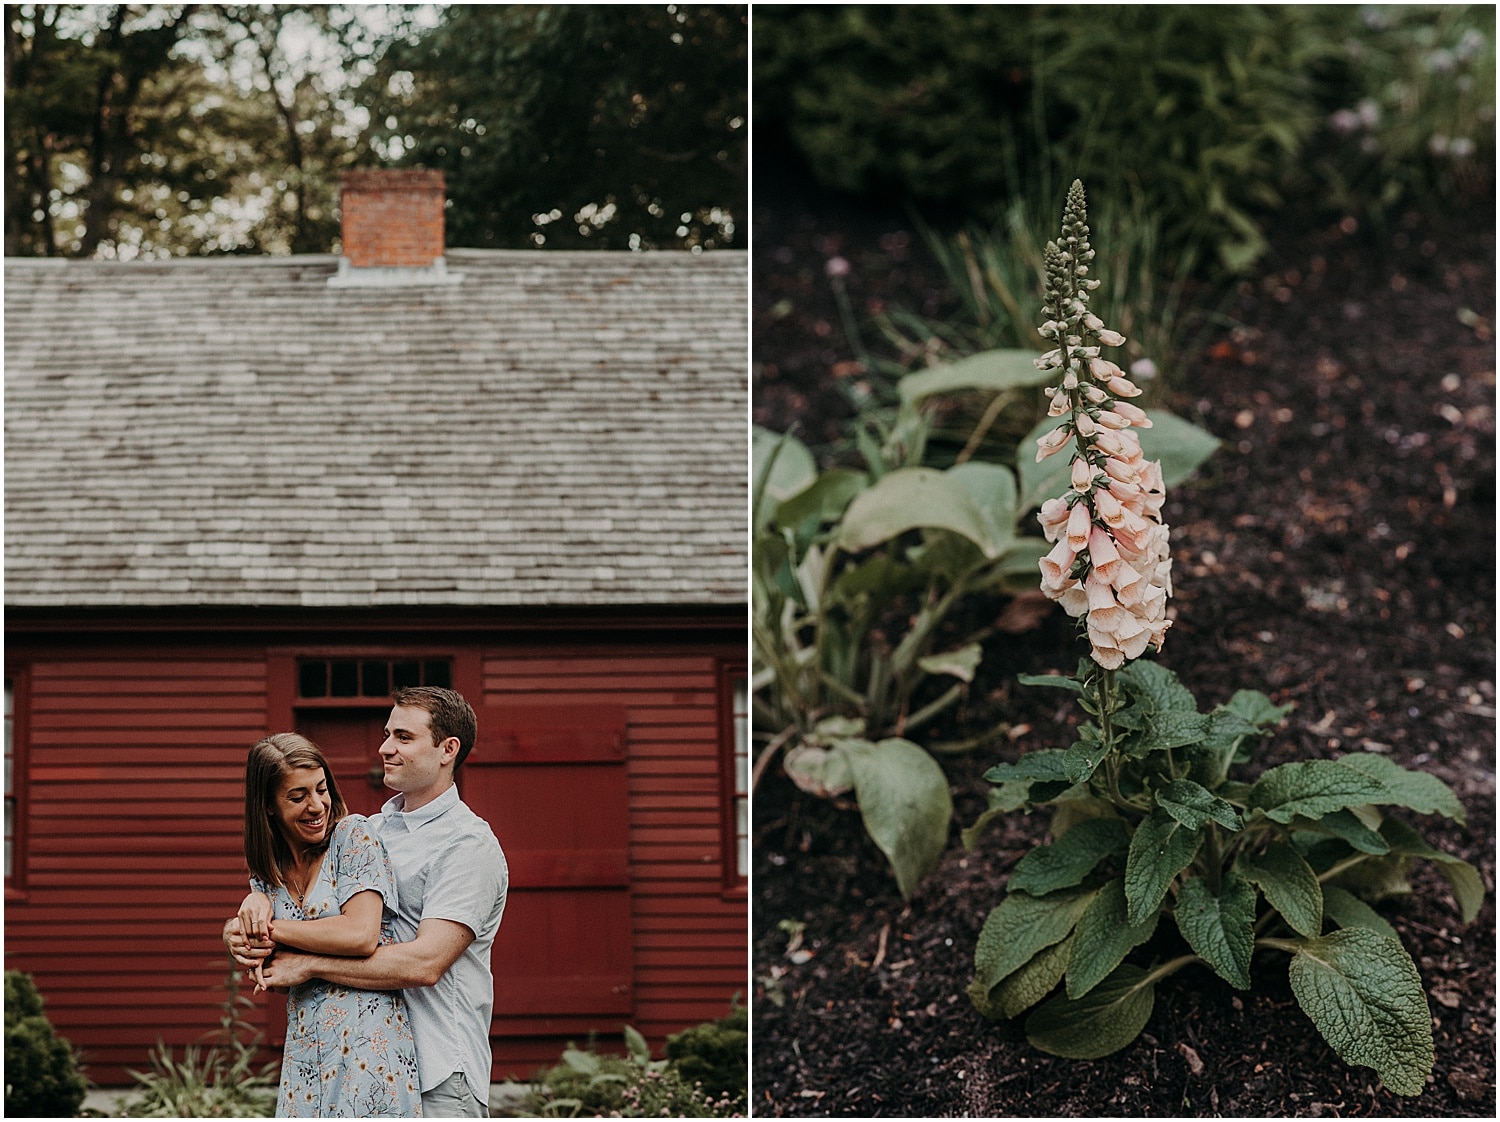 snuggling at their engagement session in maine